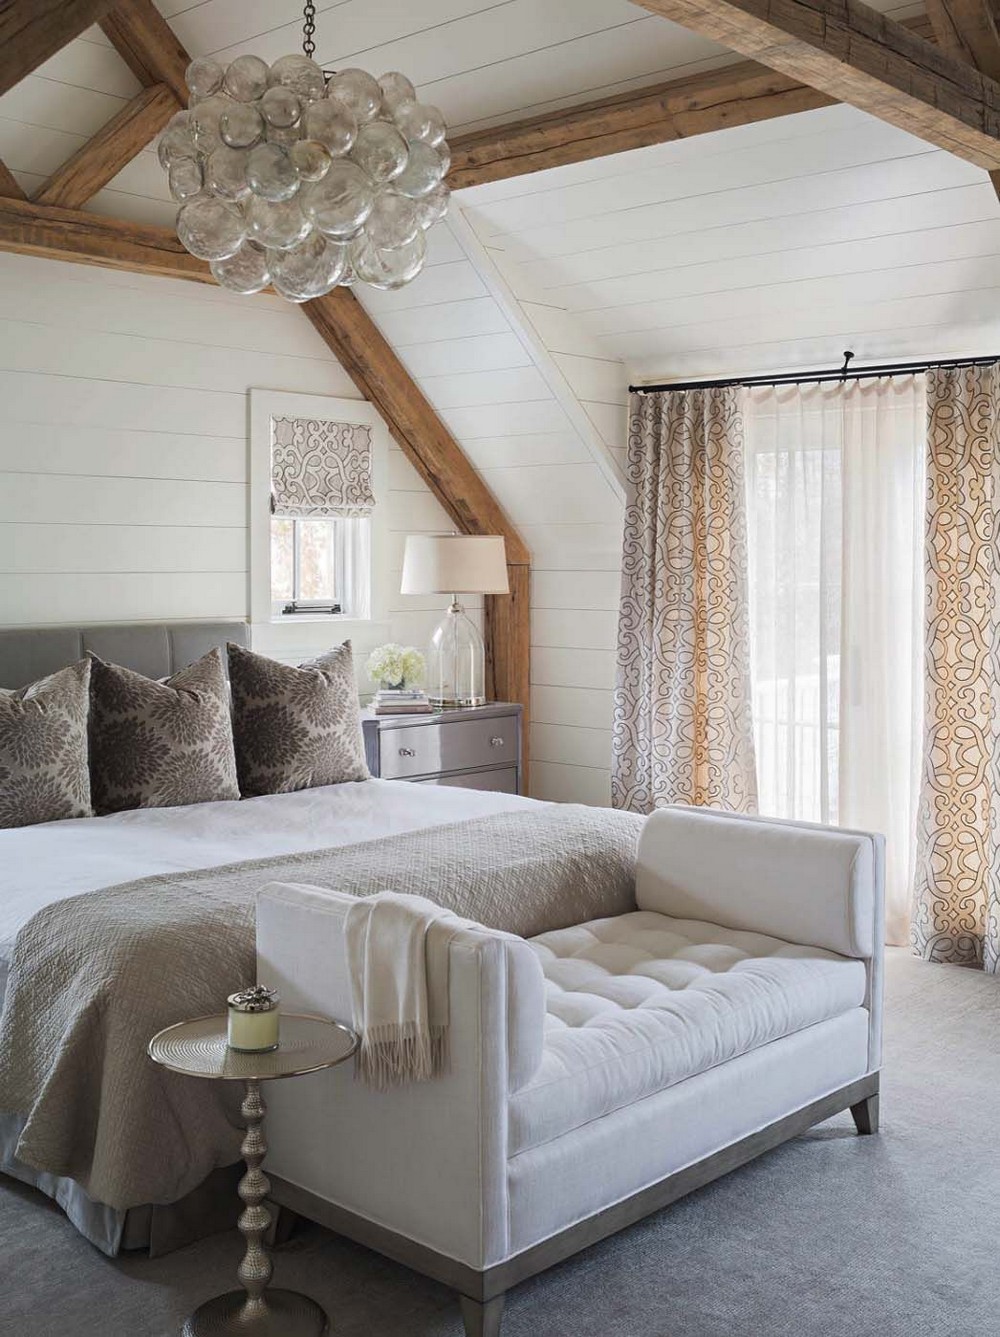 5 dreamy lighting ideas perfect for modern master bedrooms